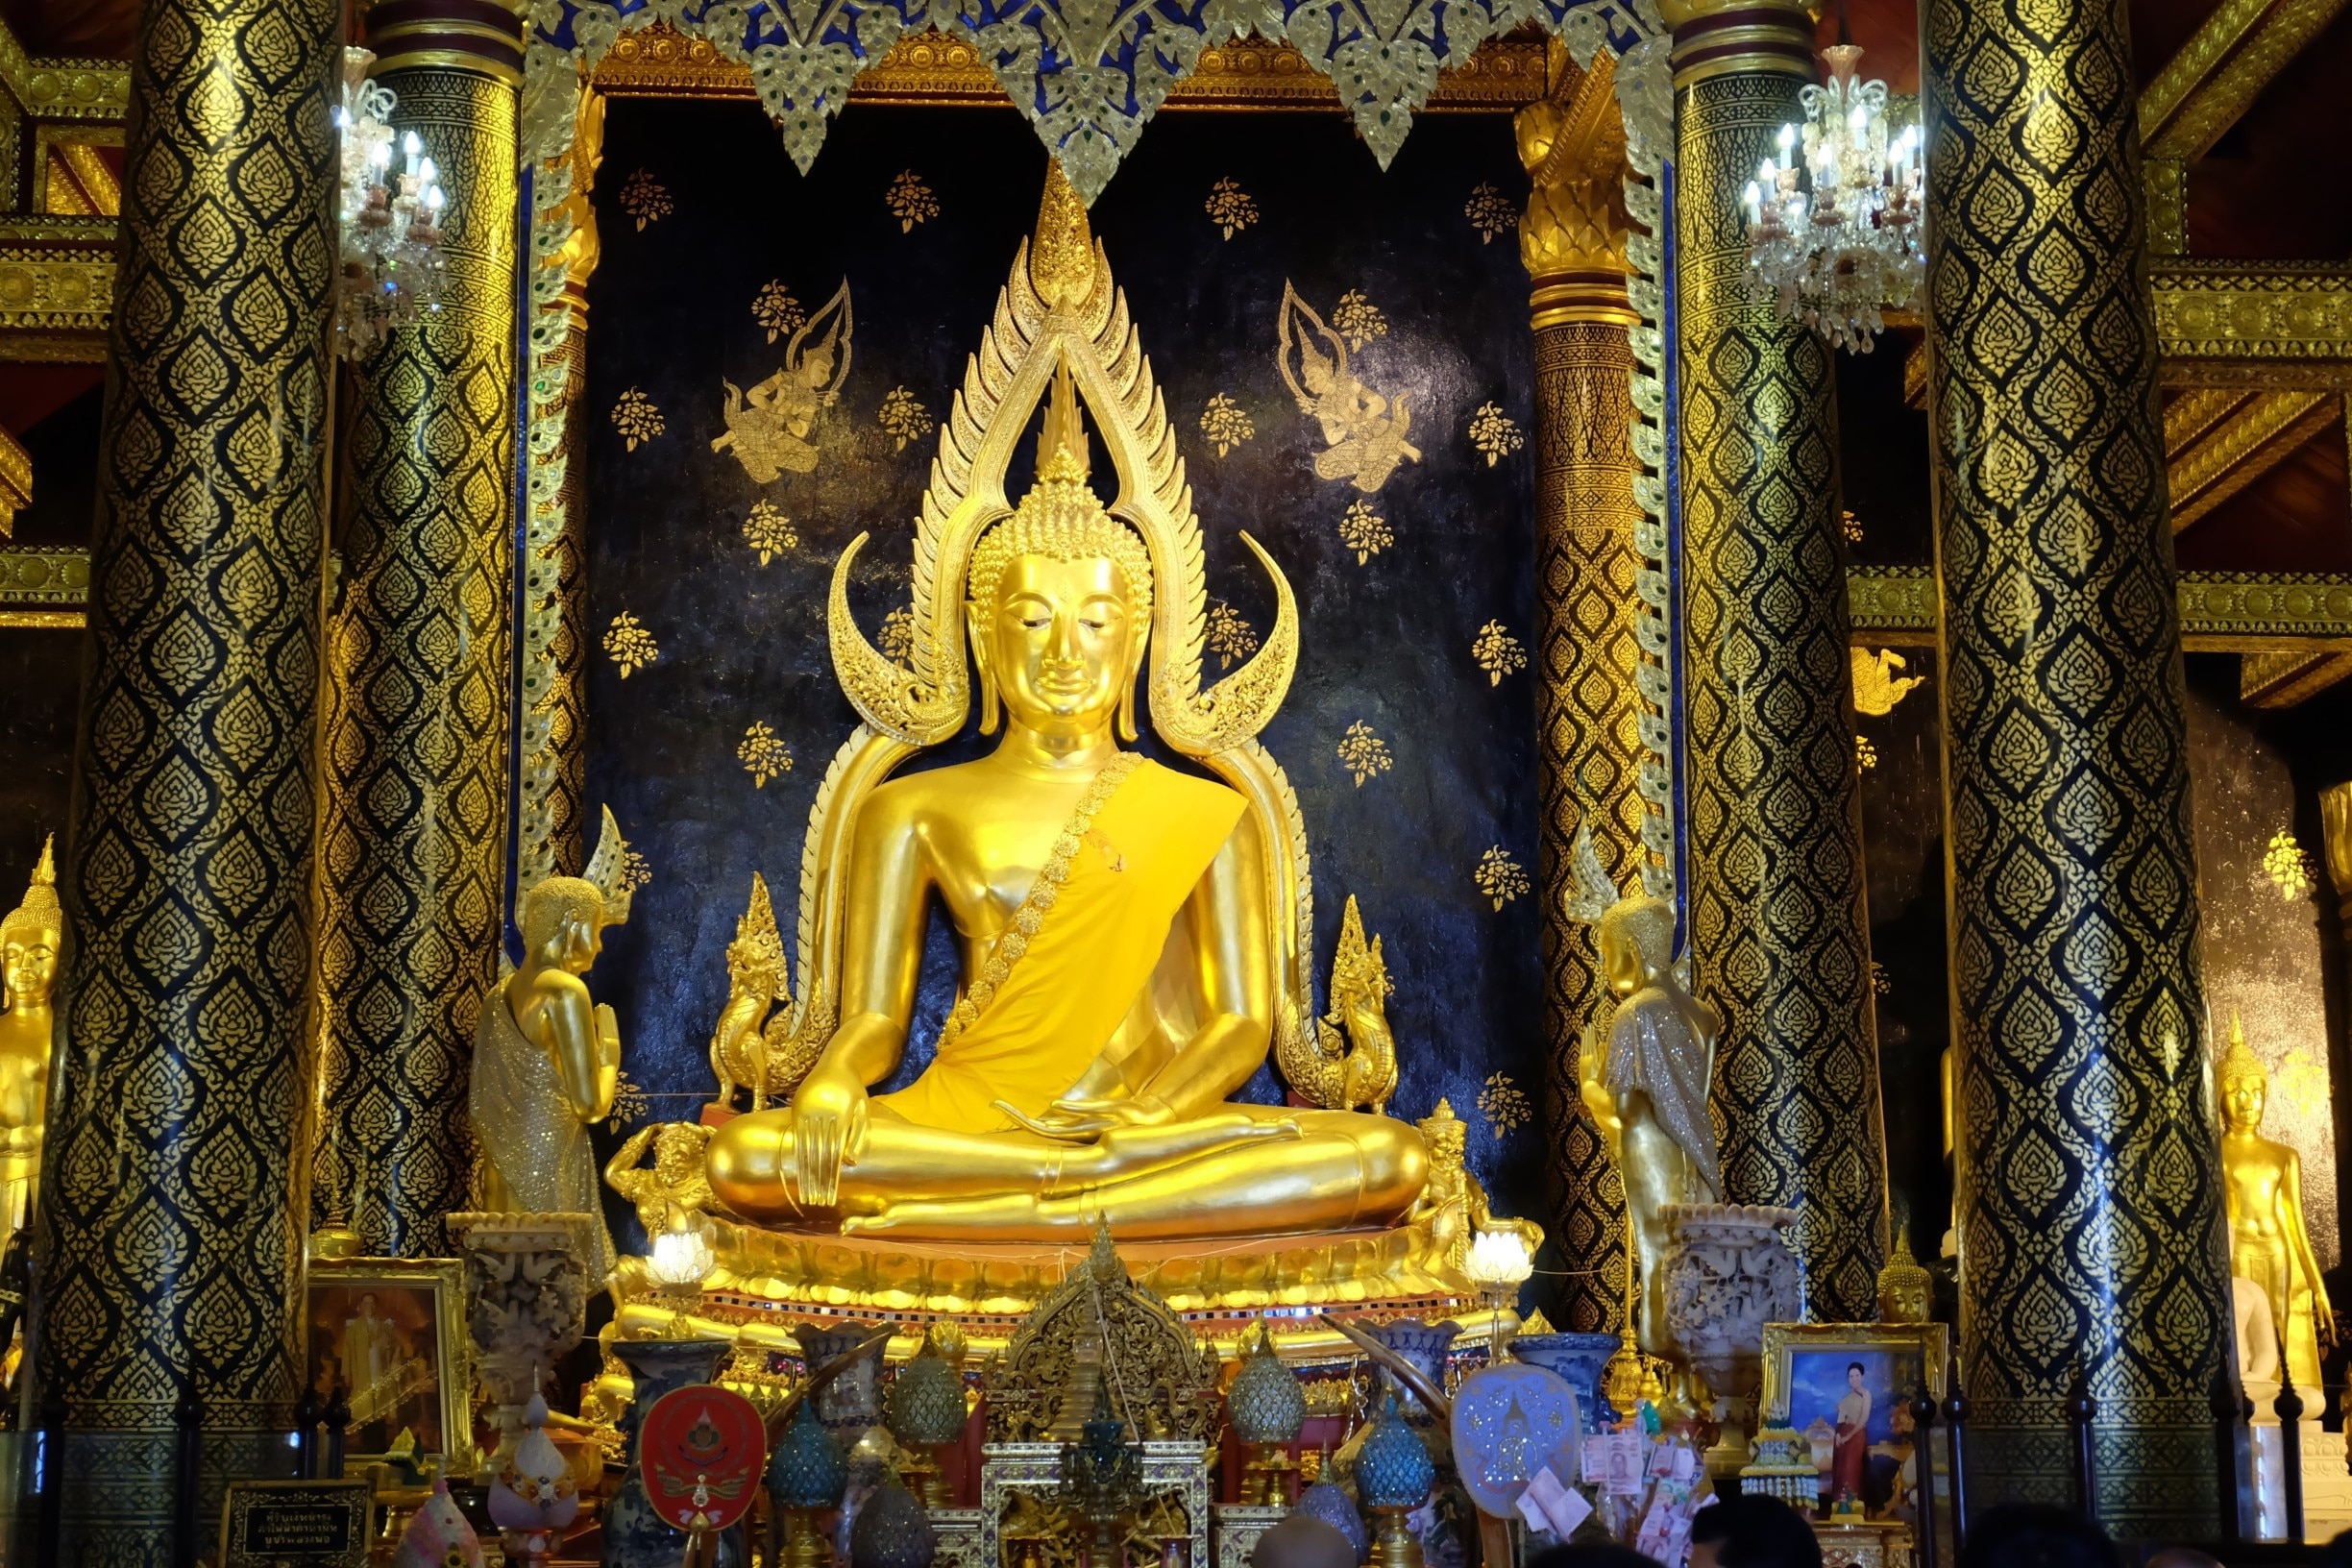 Beautiful The attitude of subduing Mara Buddha Image in Thailand . In Sukkhothai period  .The Lord has a wide elbow 5 1 5 creep natak inches (2.875 m) high seven cubit (3.5 meters) with cast polished bronze Buddha.